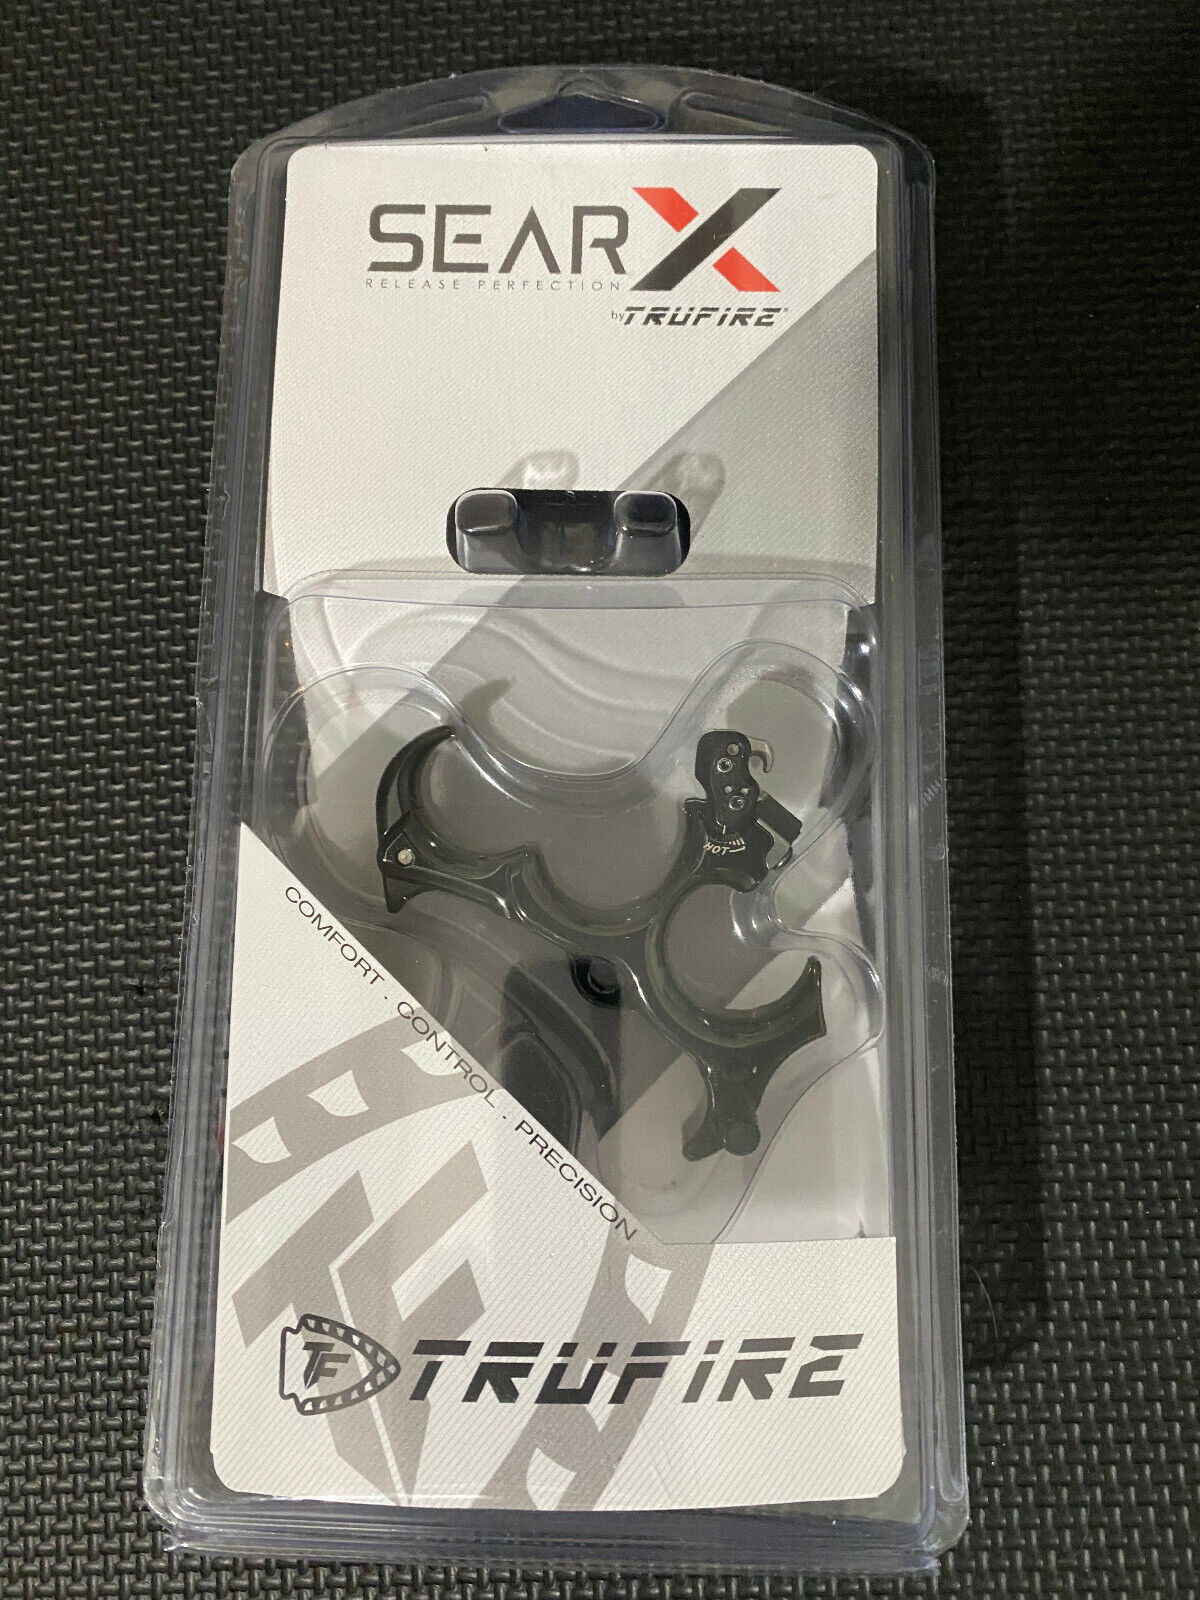 Trufire Sear X Release Back Tension Black! Brand new! Unopened!!